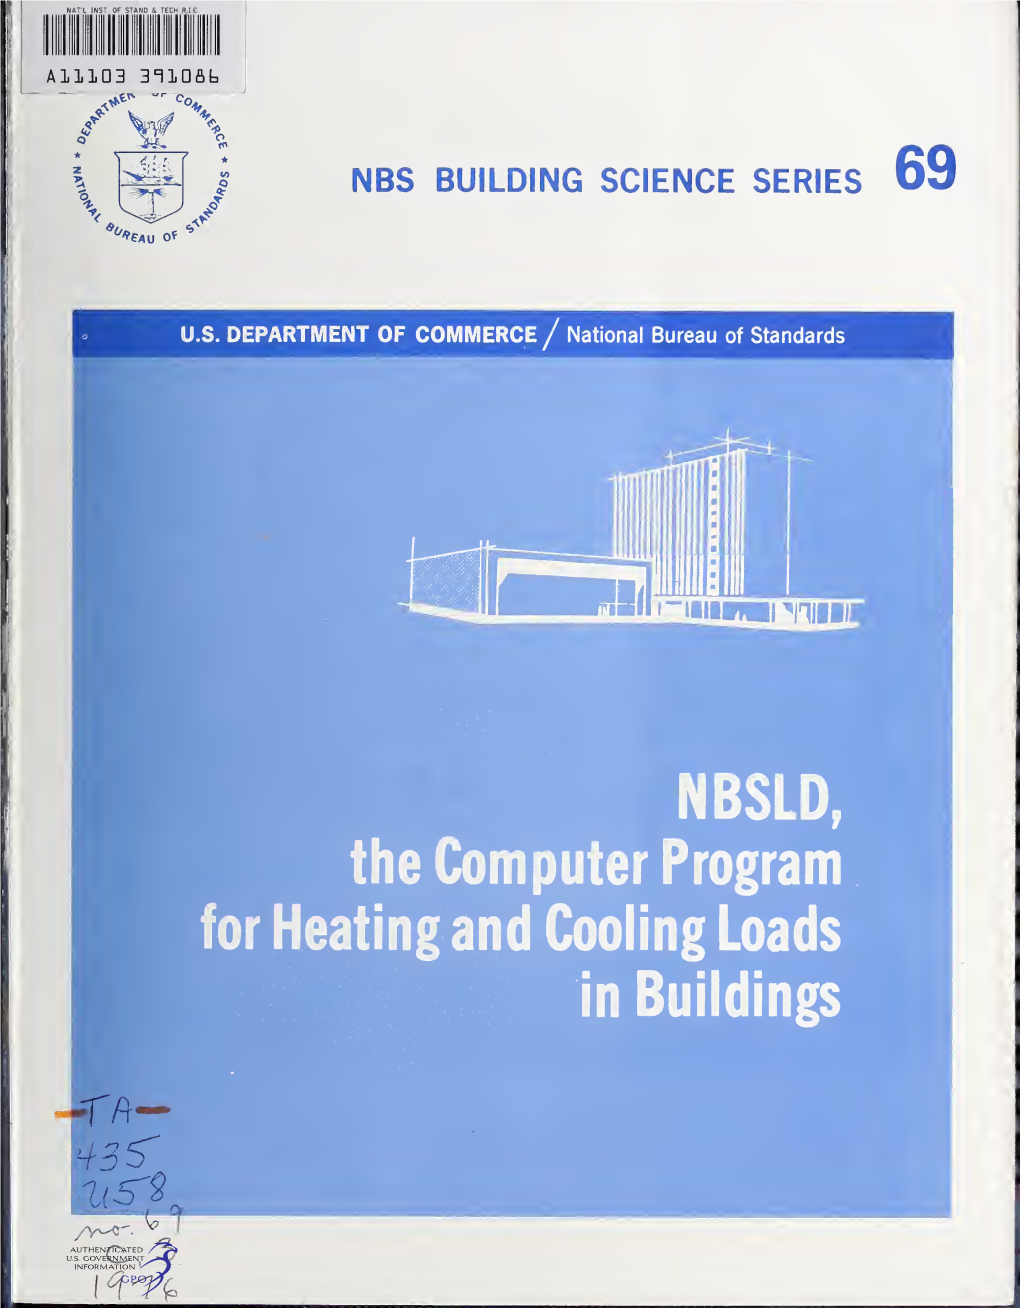 NBSLD, the Computer Program for Heating and Cooling Loads in Buildings N£6 ^\\Cjiaa Ocifnce